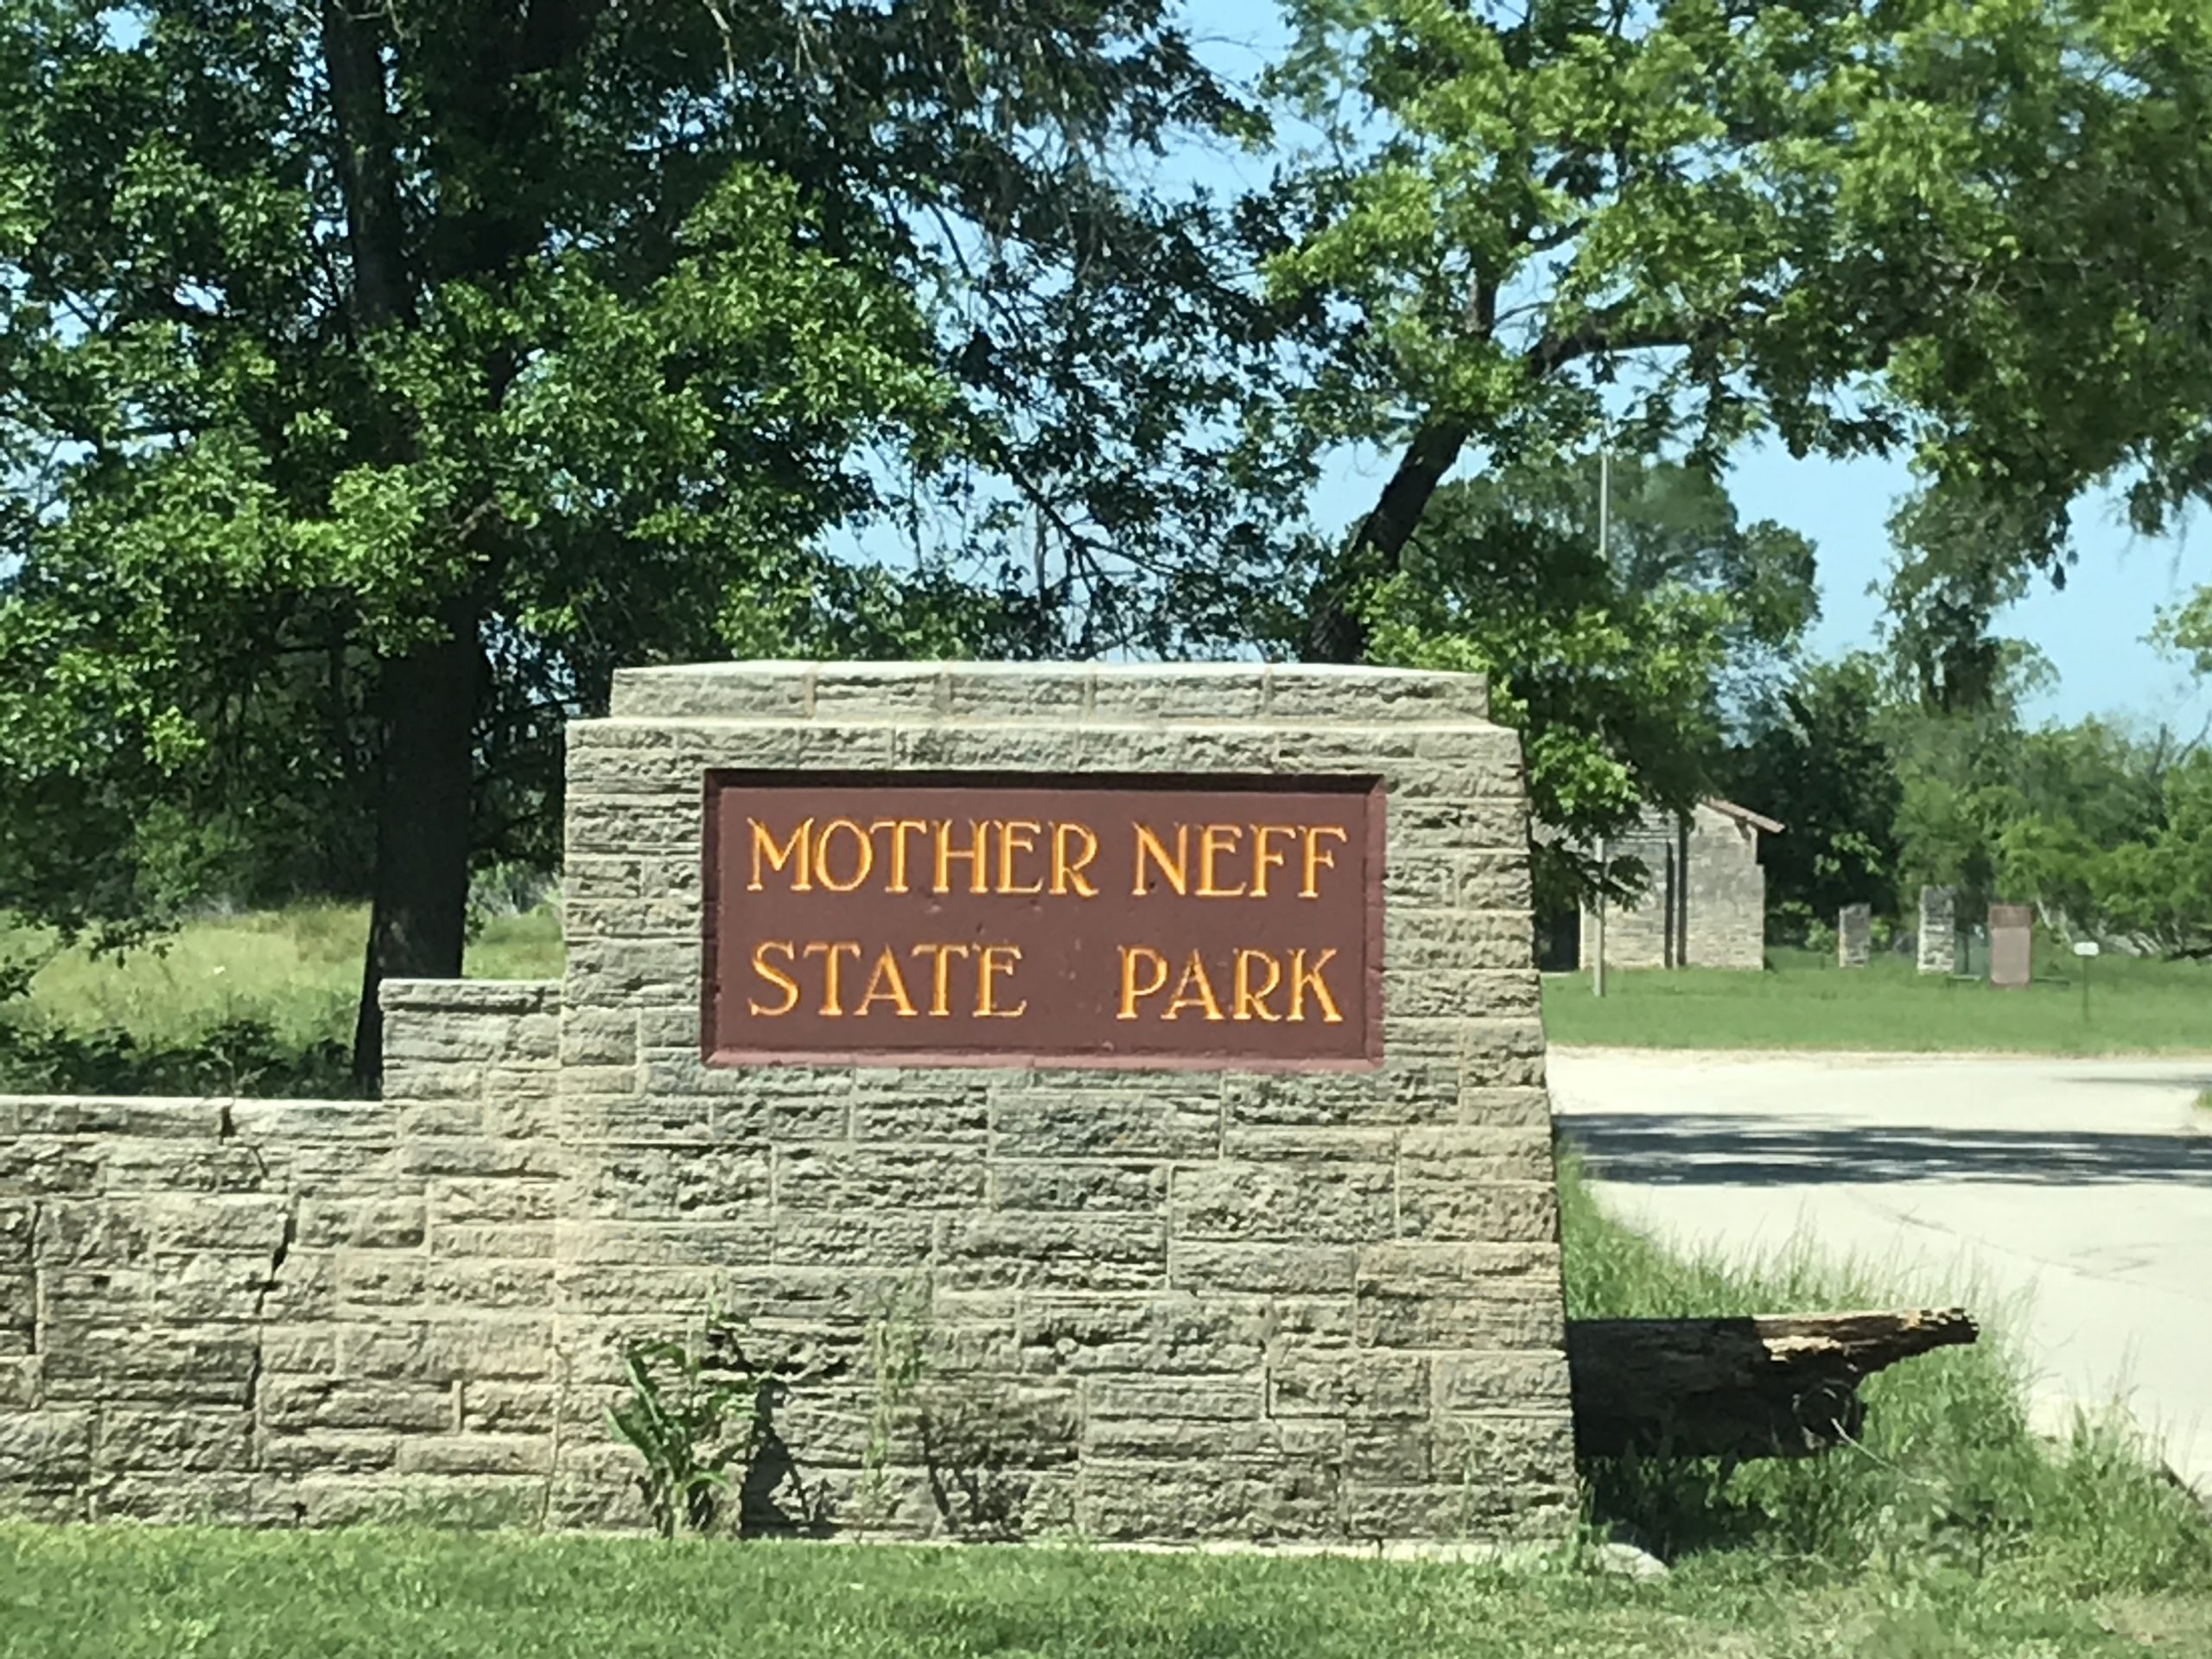 Mother Neff State Park